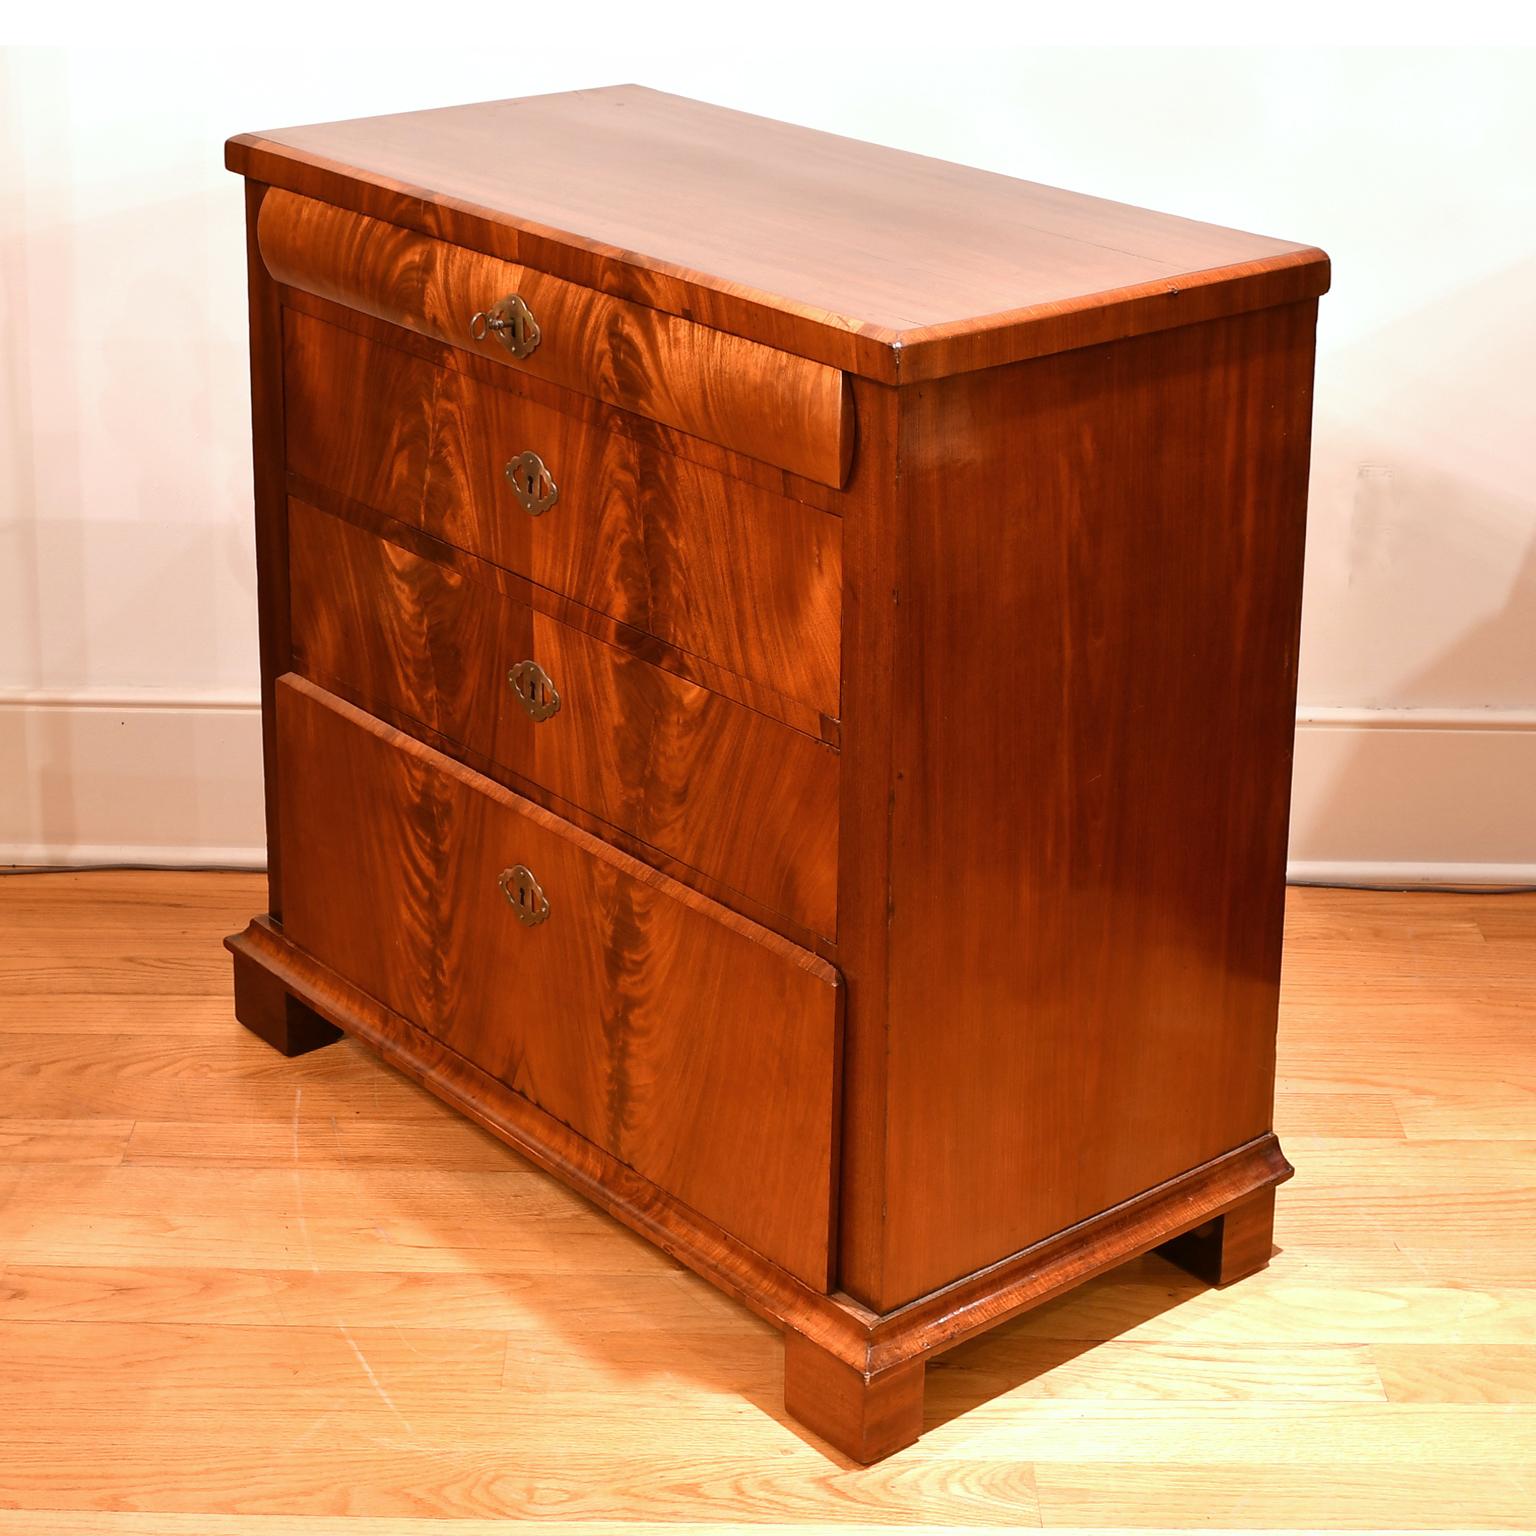 German Antique Empire/ Biedermeier Chest of Drawers in West Indies Mahogany, c. 1825 For Sale